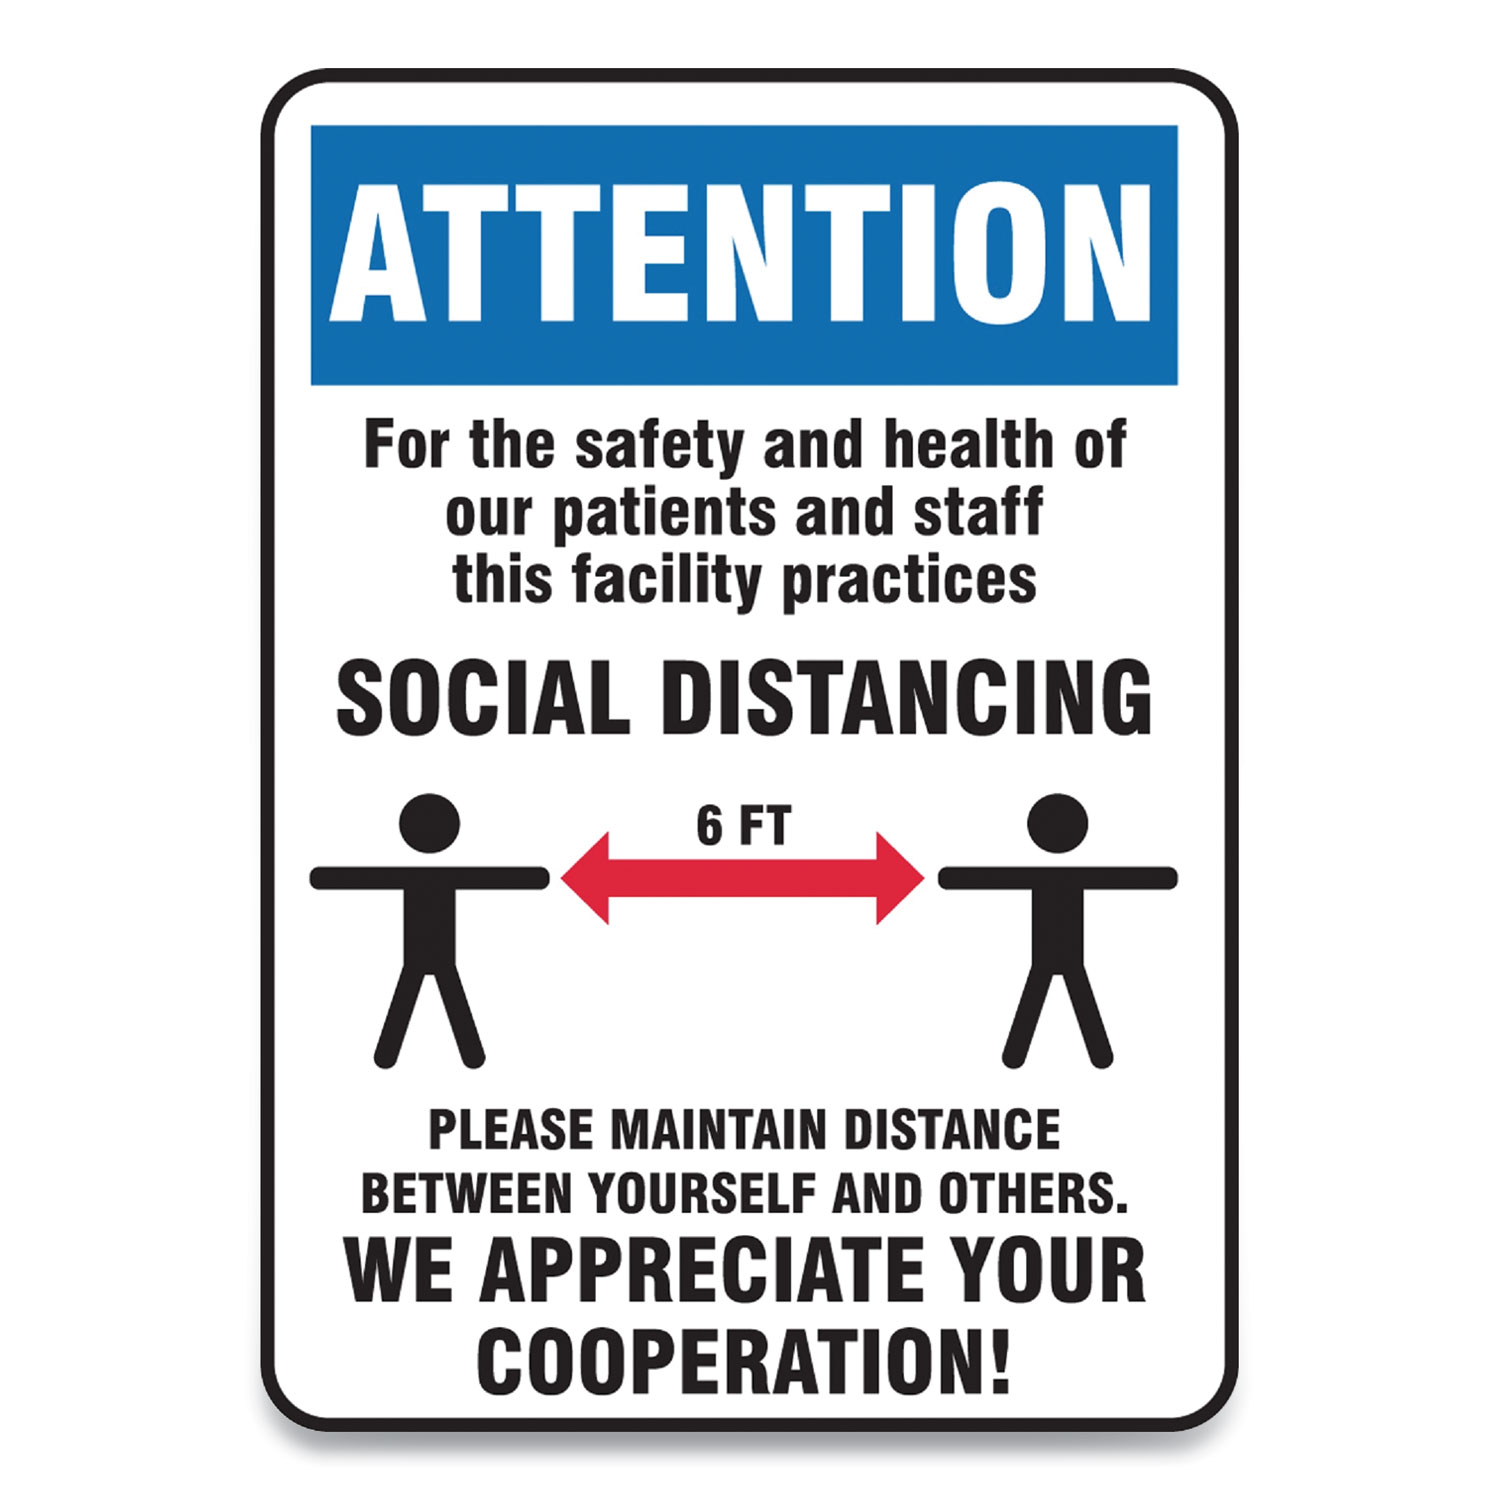  Accuform MGNG907VPESP Social Distance Signs, Wall, 10 x 14, Patients and Staff Social Distancing, Humans/Arrows, Blue/White, 10/Pack (GN1MGNG907VPESP) 